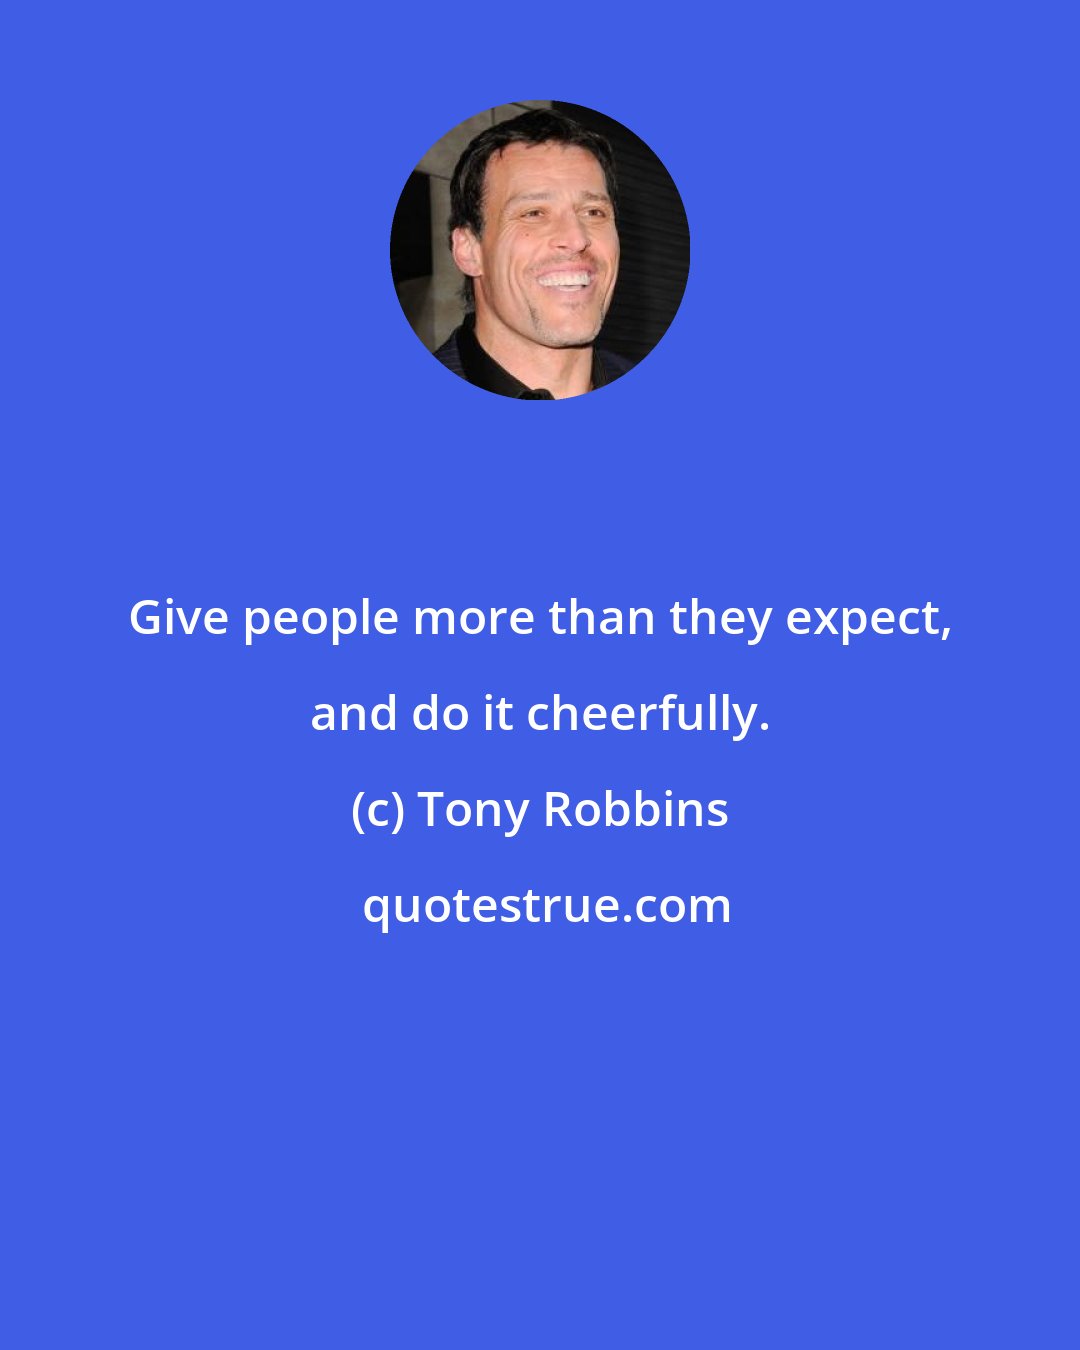 Tony Robbins: Give people more than they expect, and do it cheerfully.